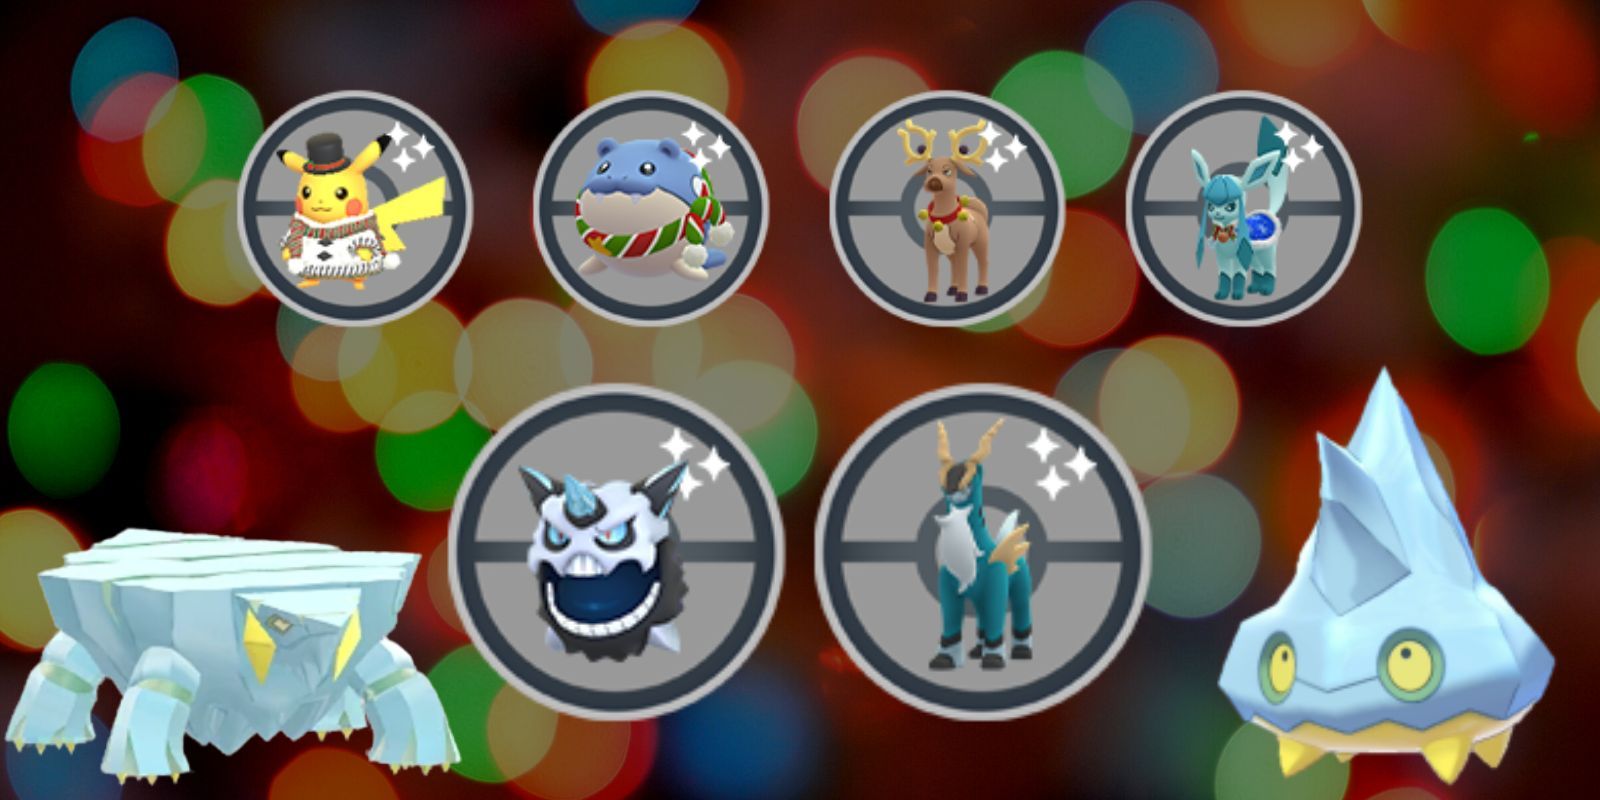 Special Pokémon that will be available during Pokémon GO's Winter Holiday Event, including Pikachu and Mega Glalie.